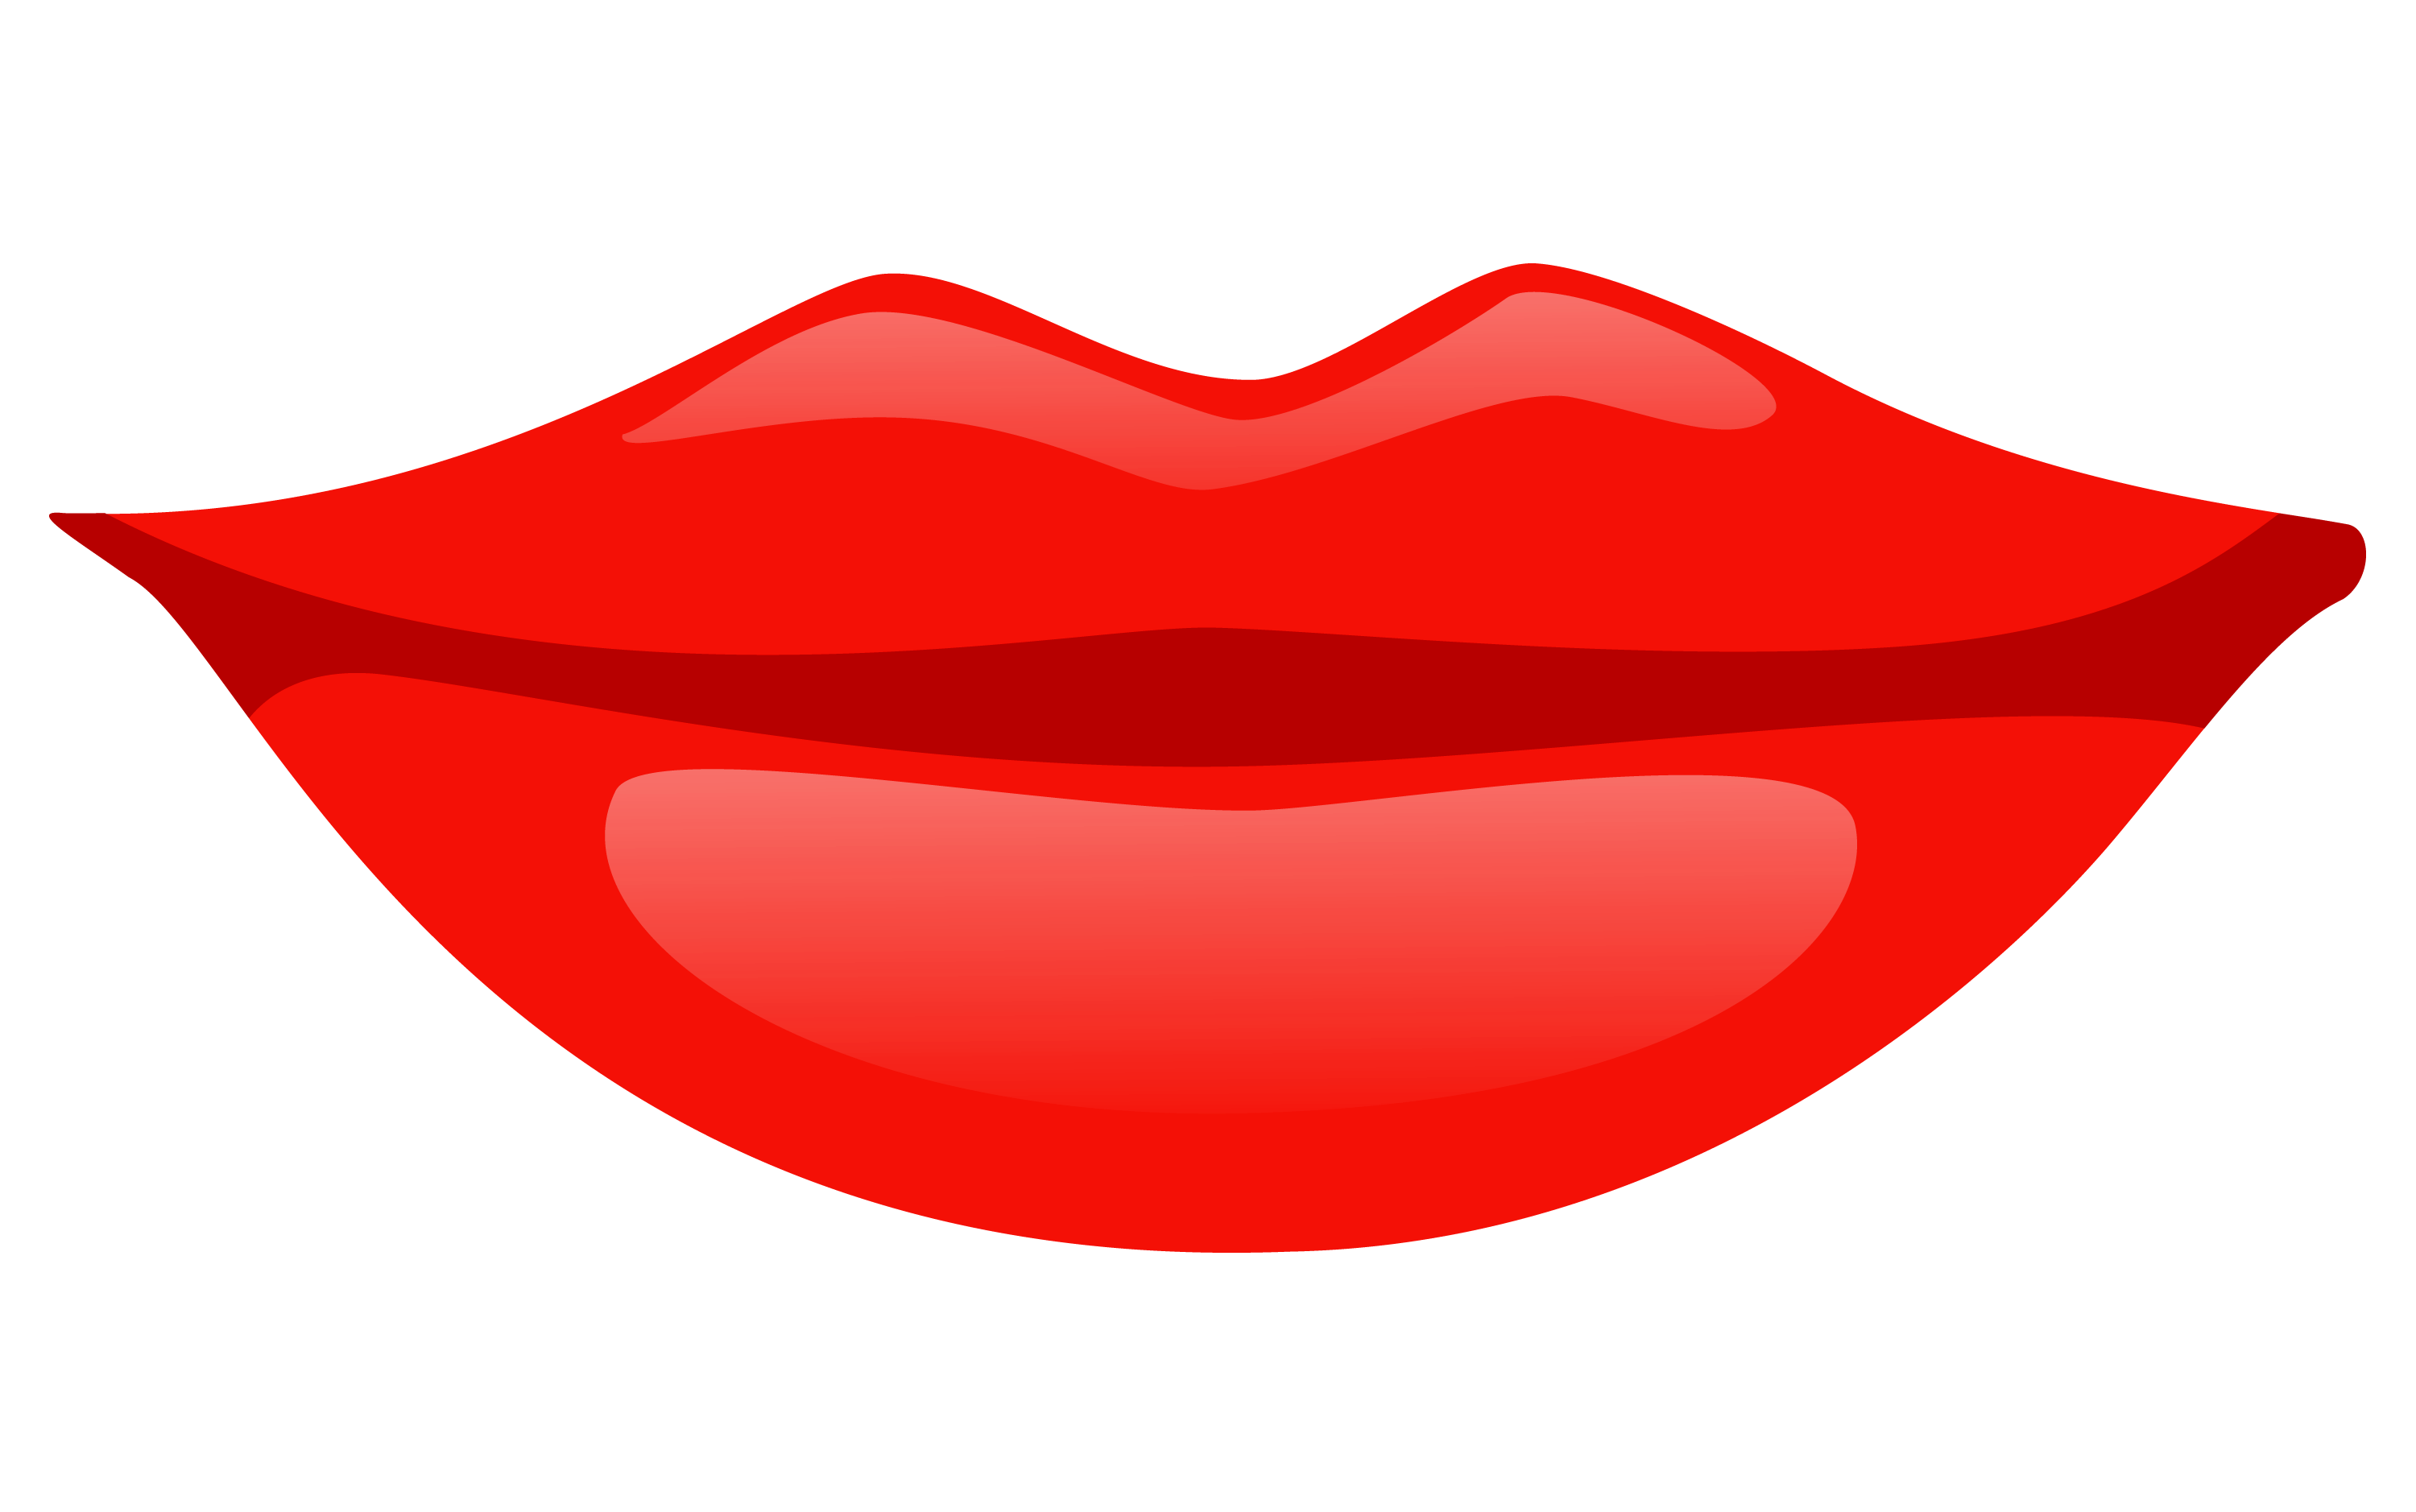 Mouth Clipart Red Object Mouth Red Object Transparent Free For